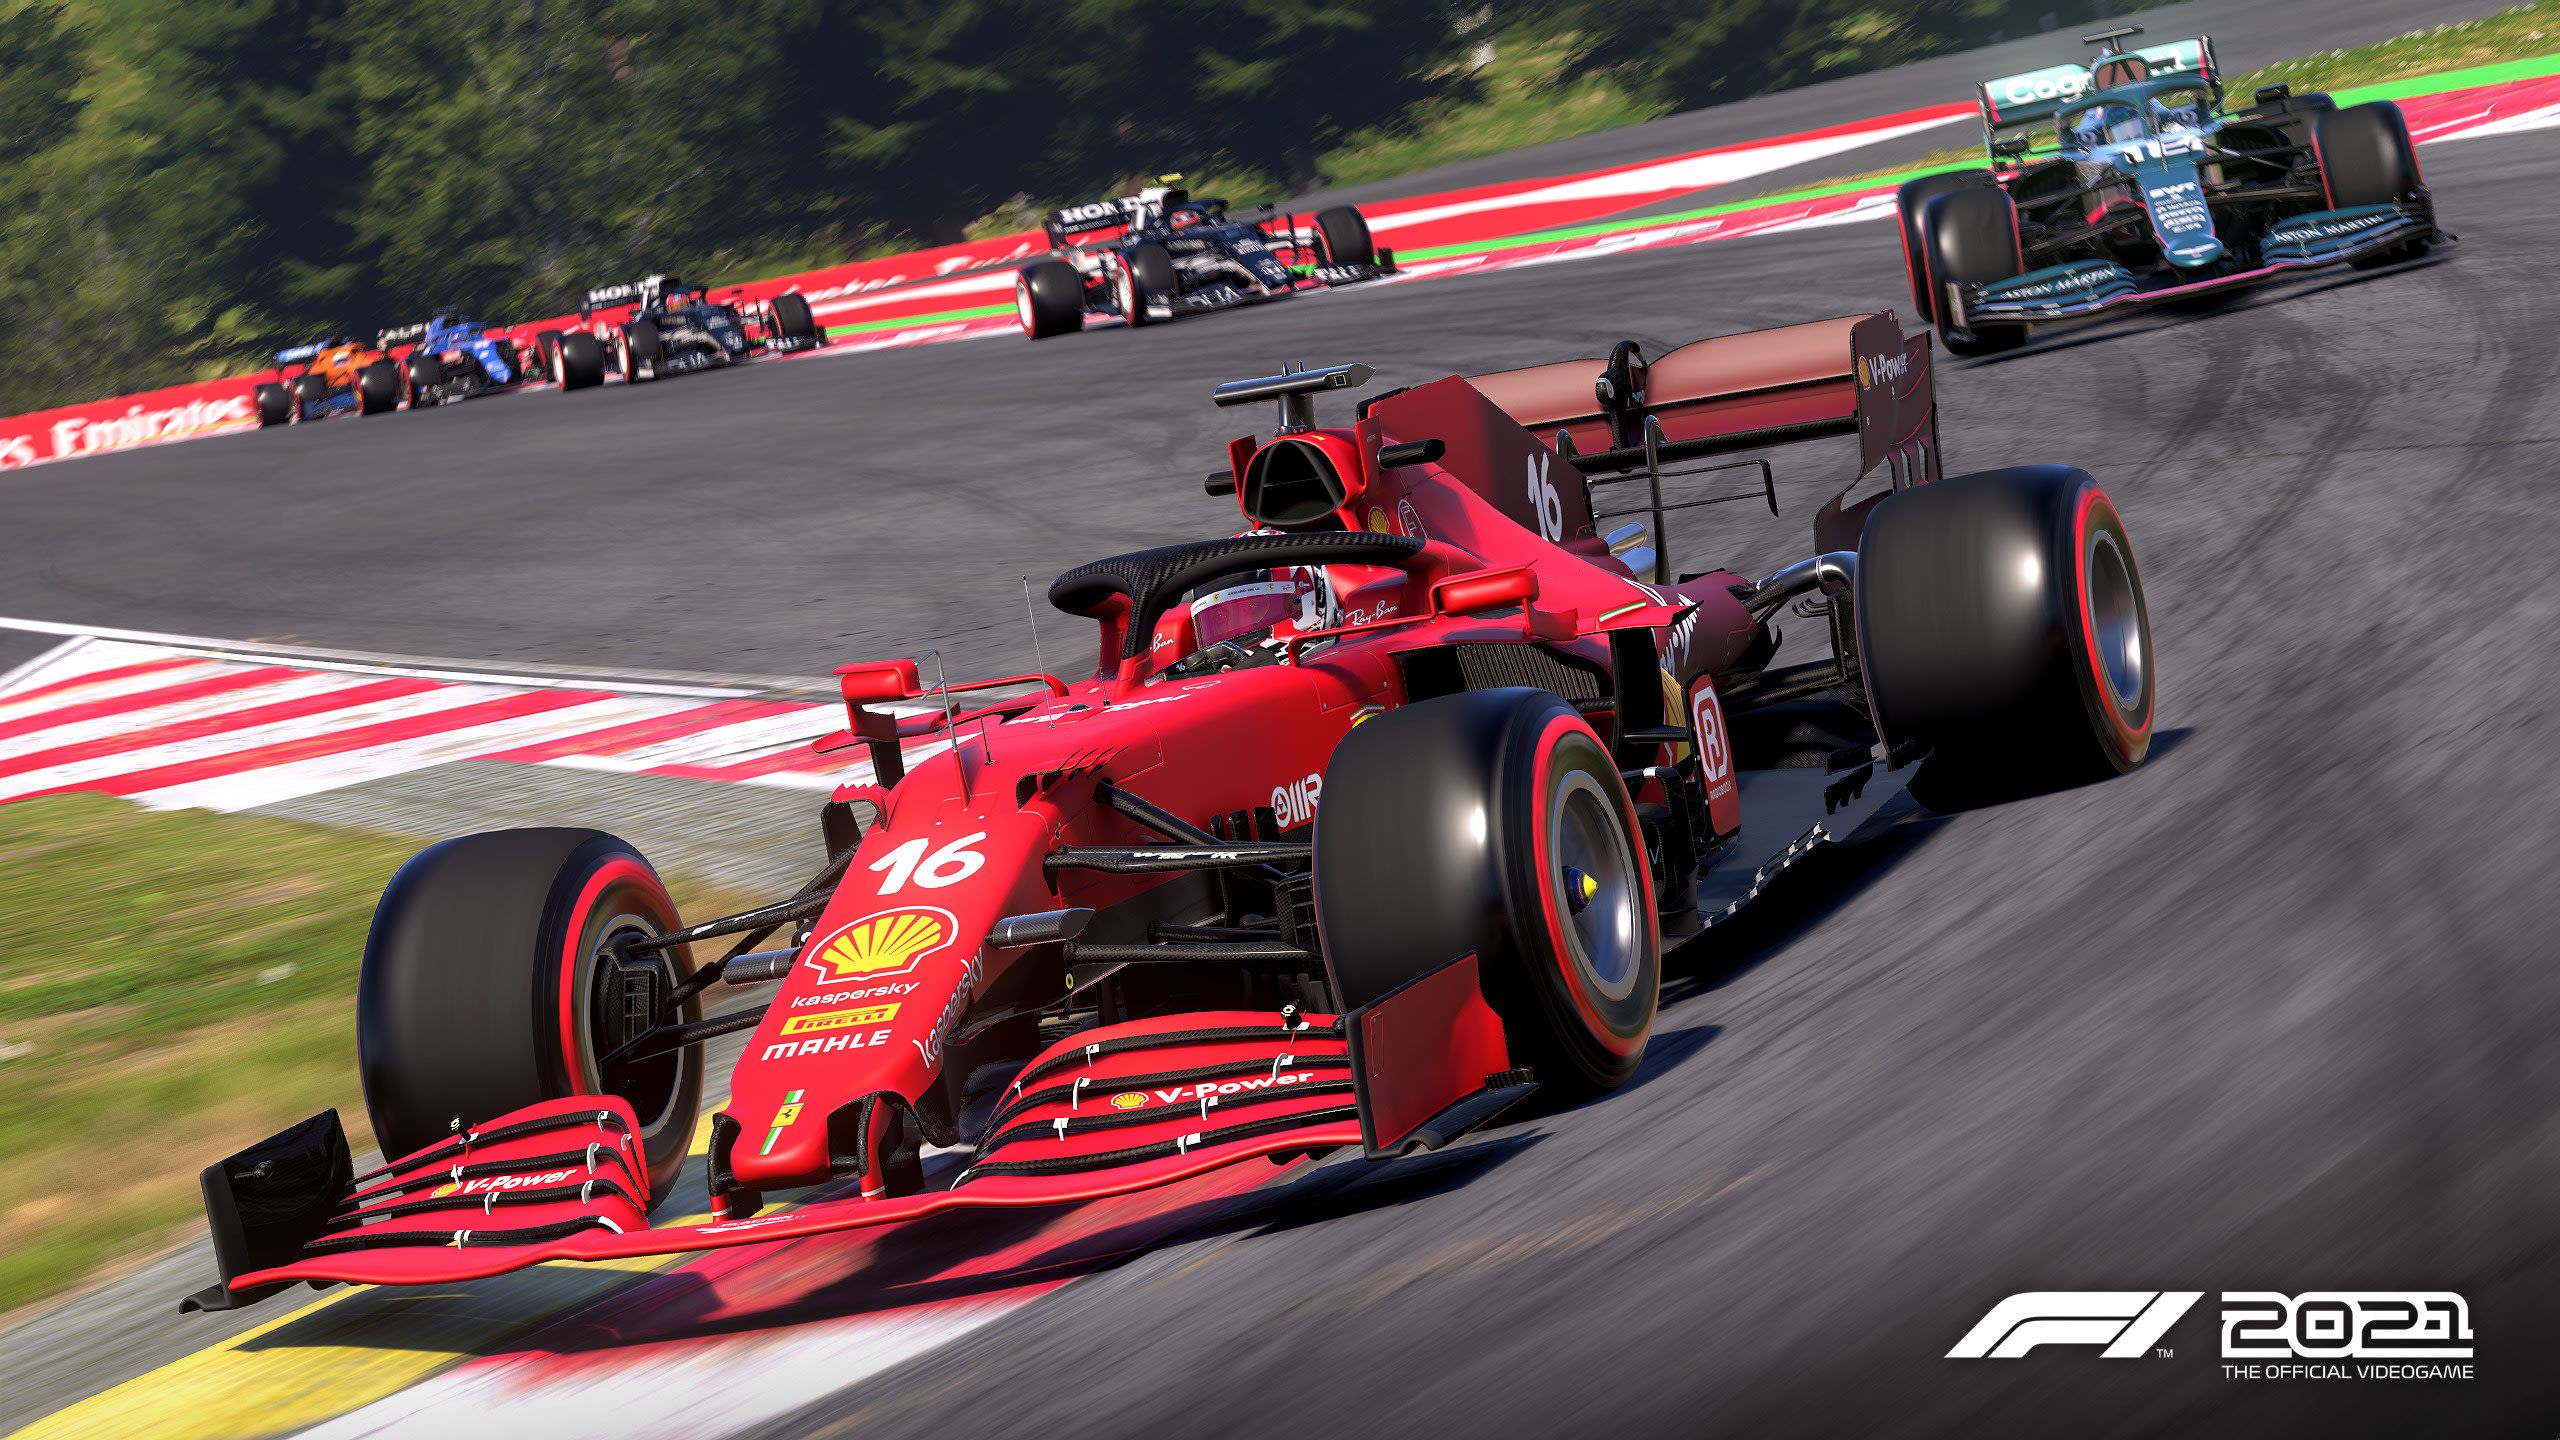 F1 2021 HD Wallpaper, HD Games 4K Wallpaper, Image, Photo and Background